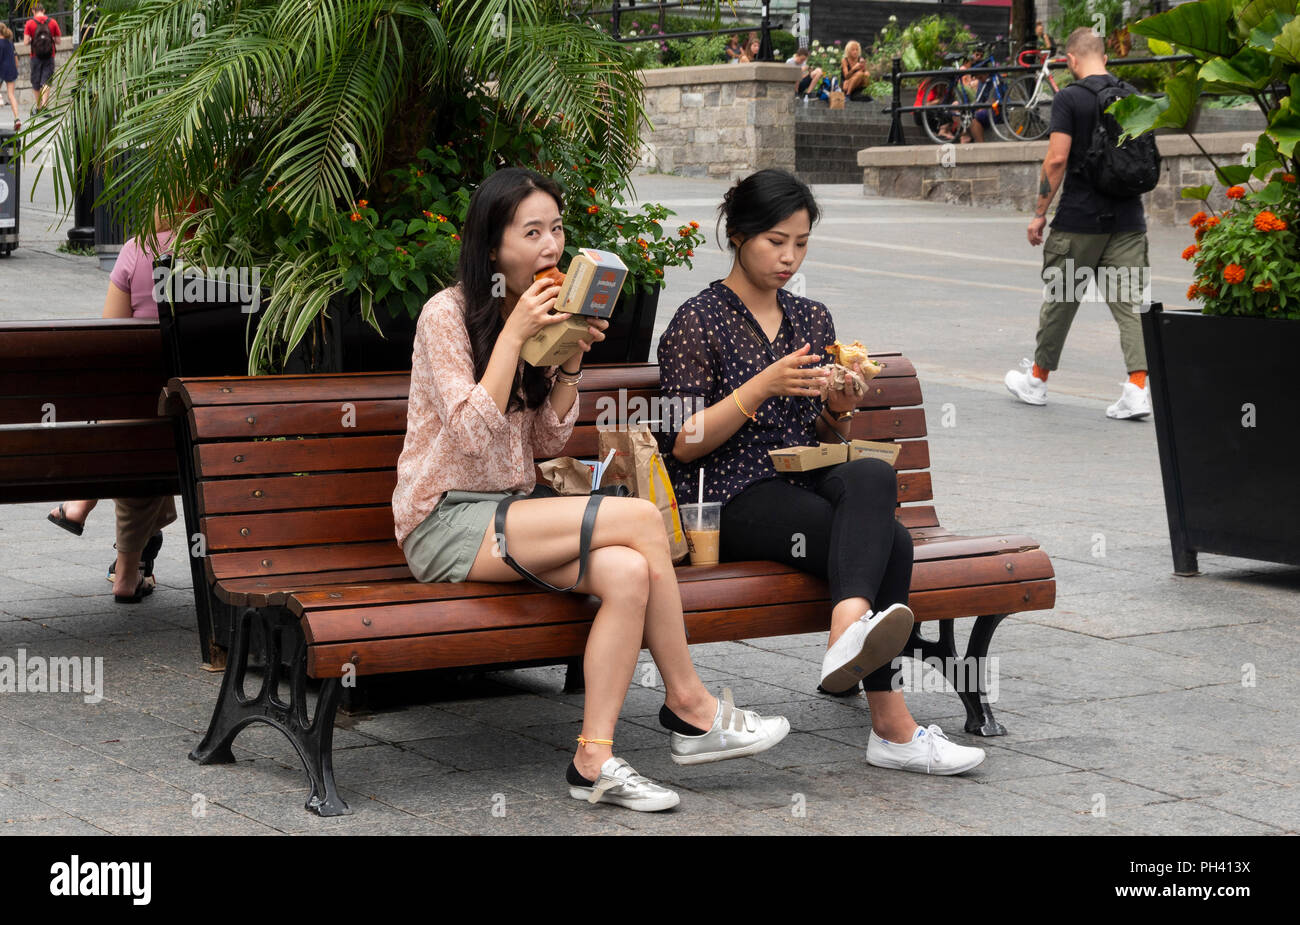 Two young Asian women sitting on a bench and eating takeaway burgers in the Place Jacques-Cartier in Old Town, Montreal, QC, Canada Stock Photo